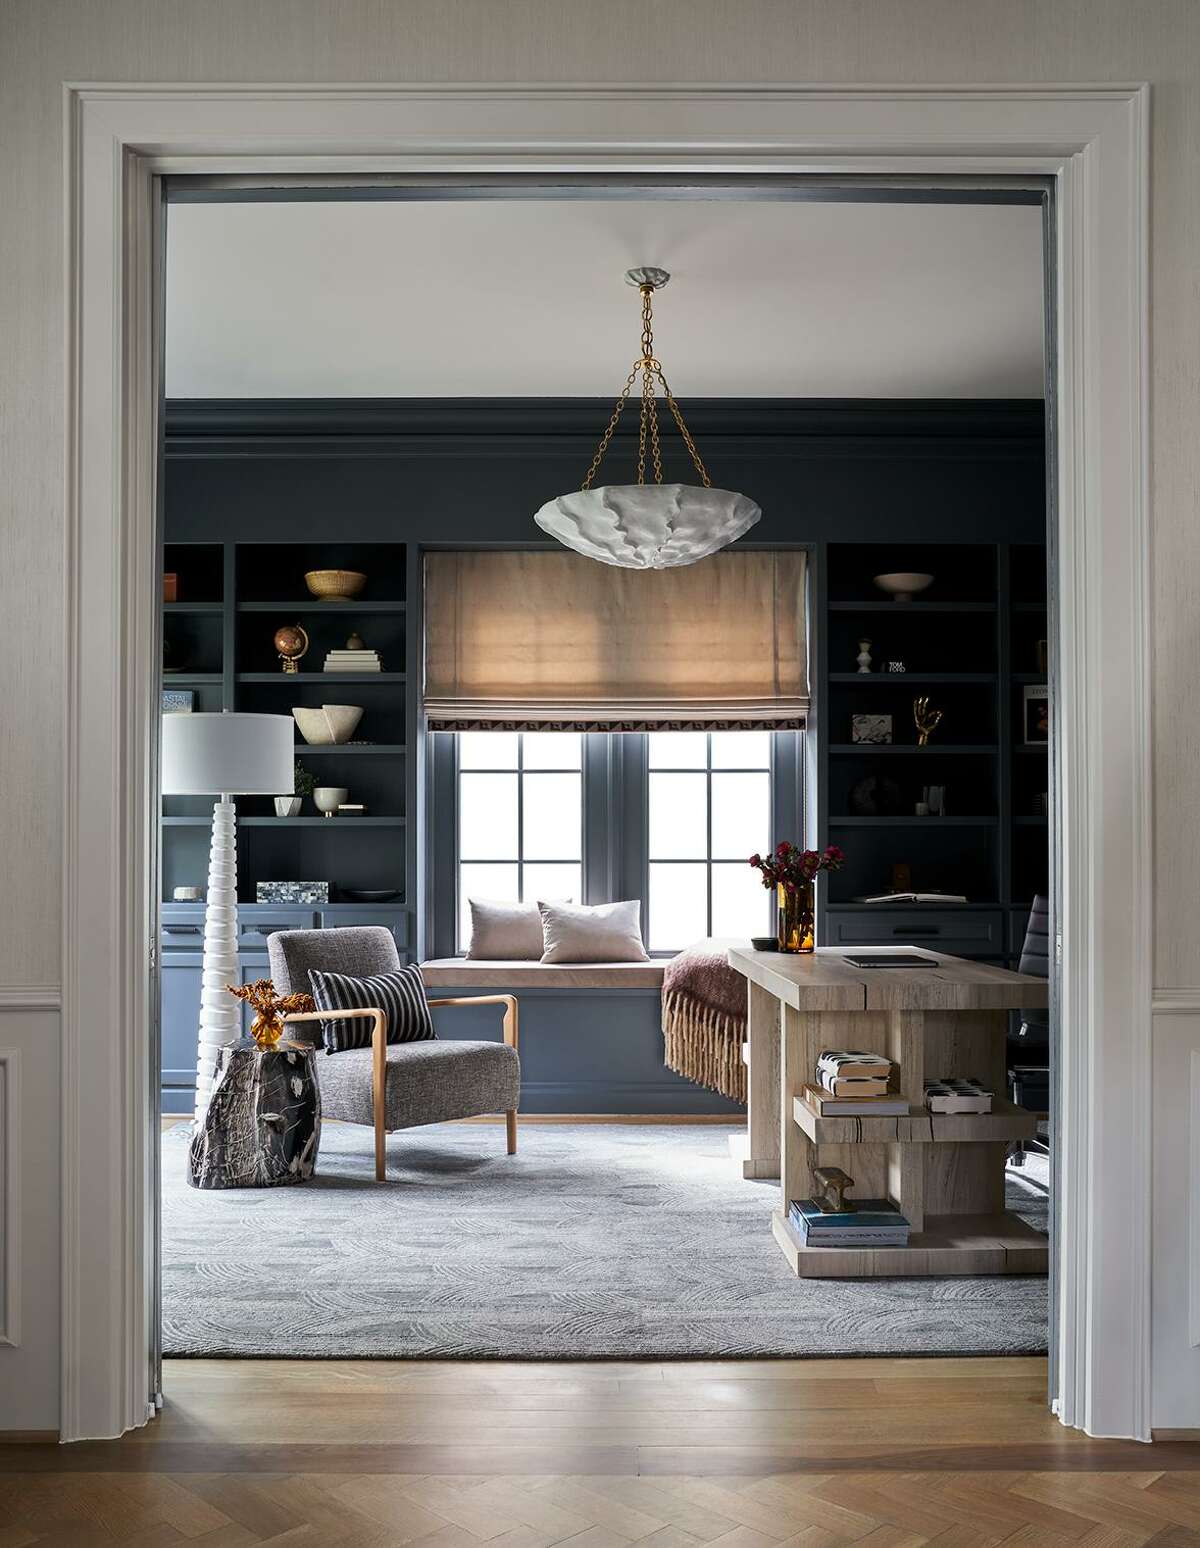 Walls and cabinets painted Sherwin-Williams “Web Gray” make a handsome backdrop for the furnishings in the home office.